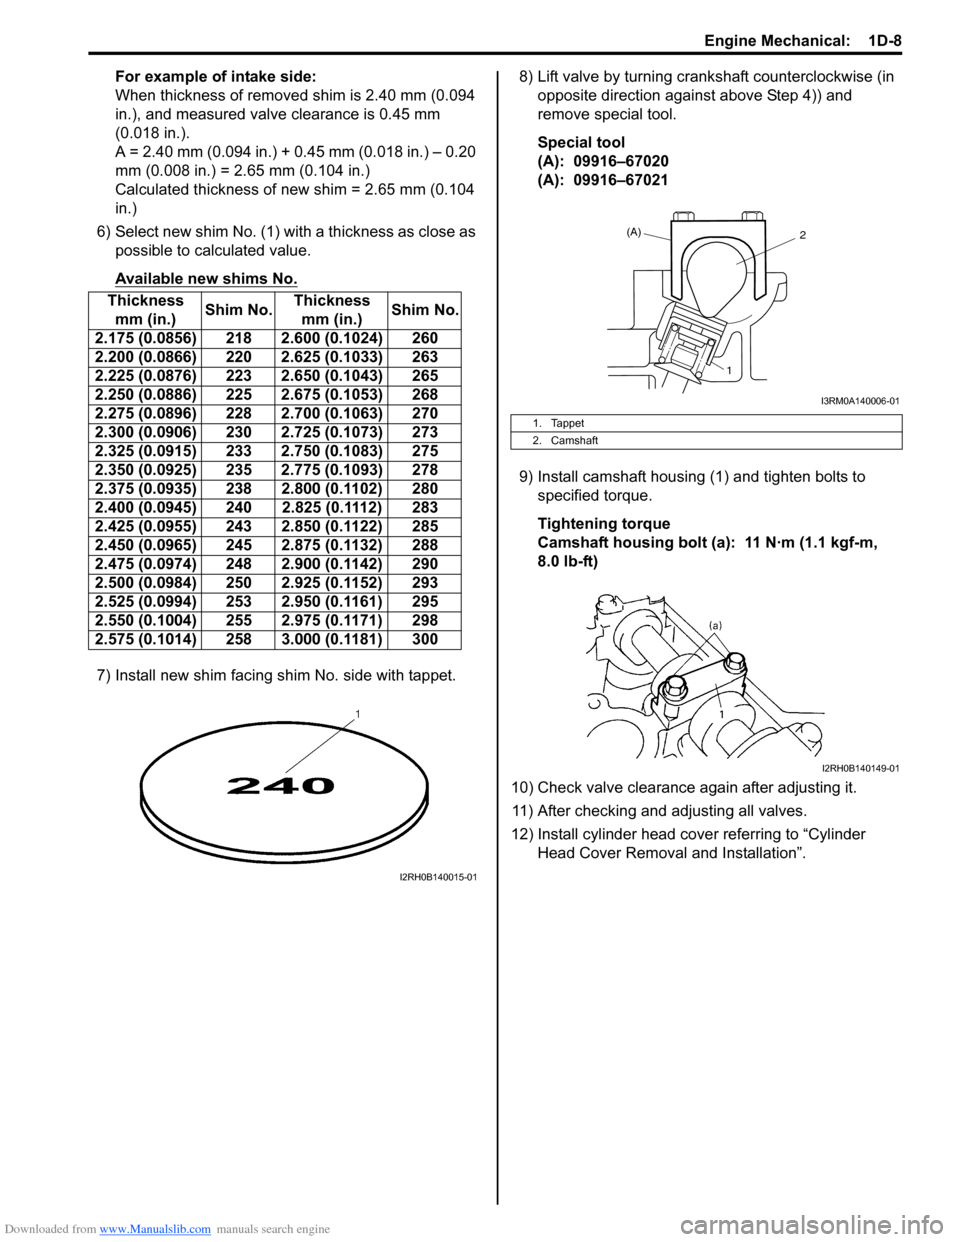 SUZUKI SWIFT 2007 2.G Service User Guide Downloaded from www.Manualslib.com manuals search engine Engine Mechanical:  1D-8
For example of intake side:
When thickness of removed shim is 2.40 mm (0.094 
in.), and measured valve clearance is 0.